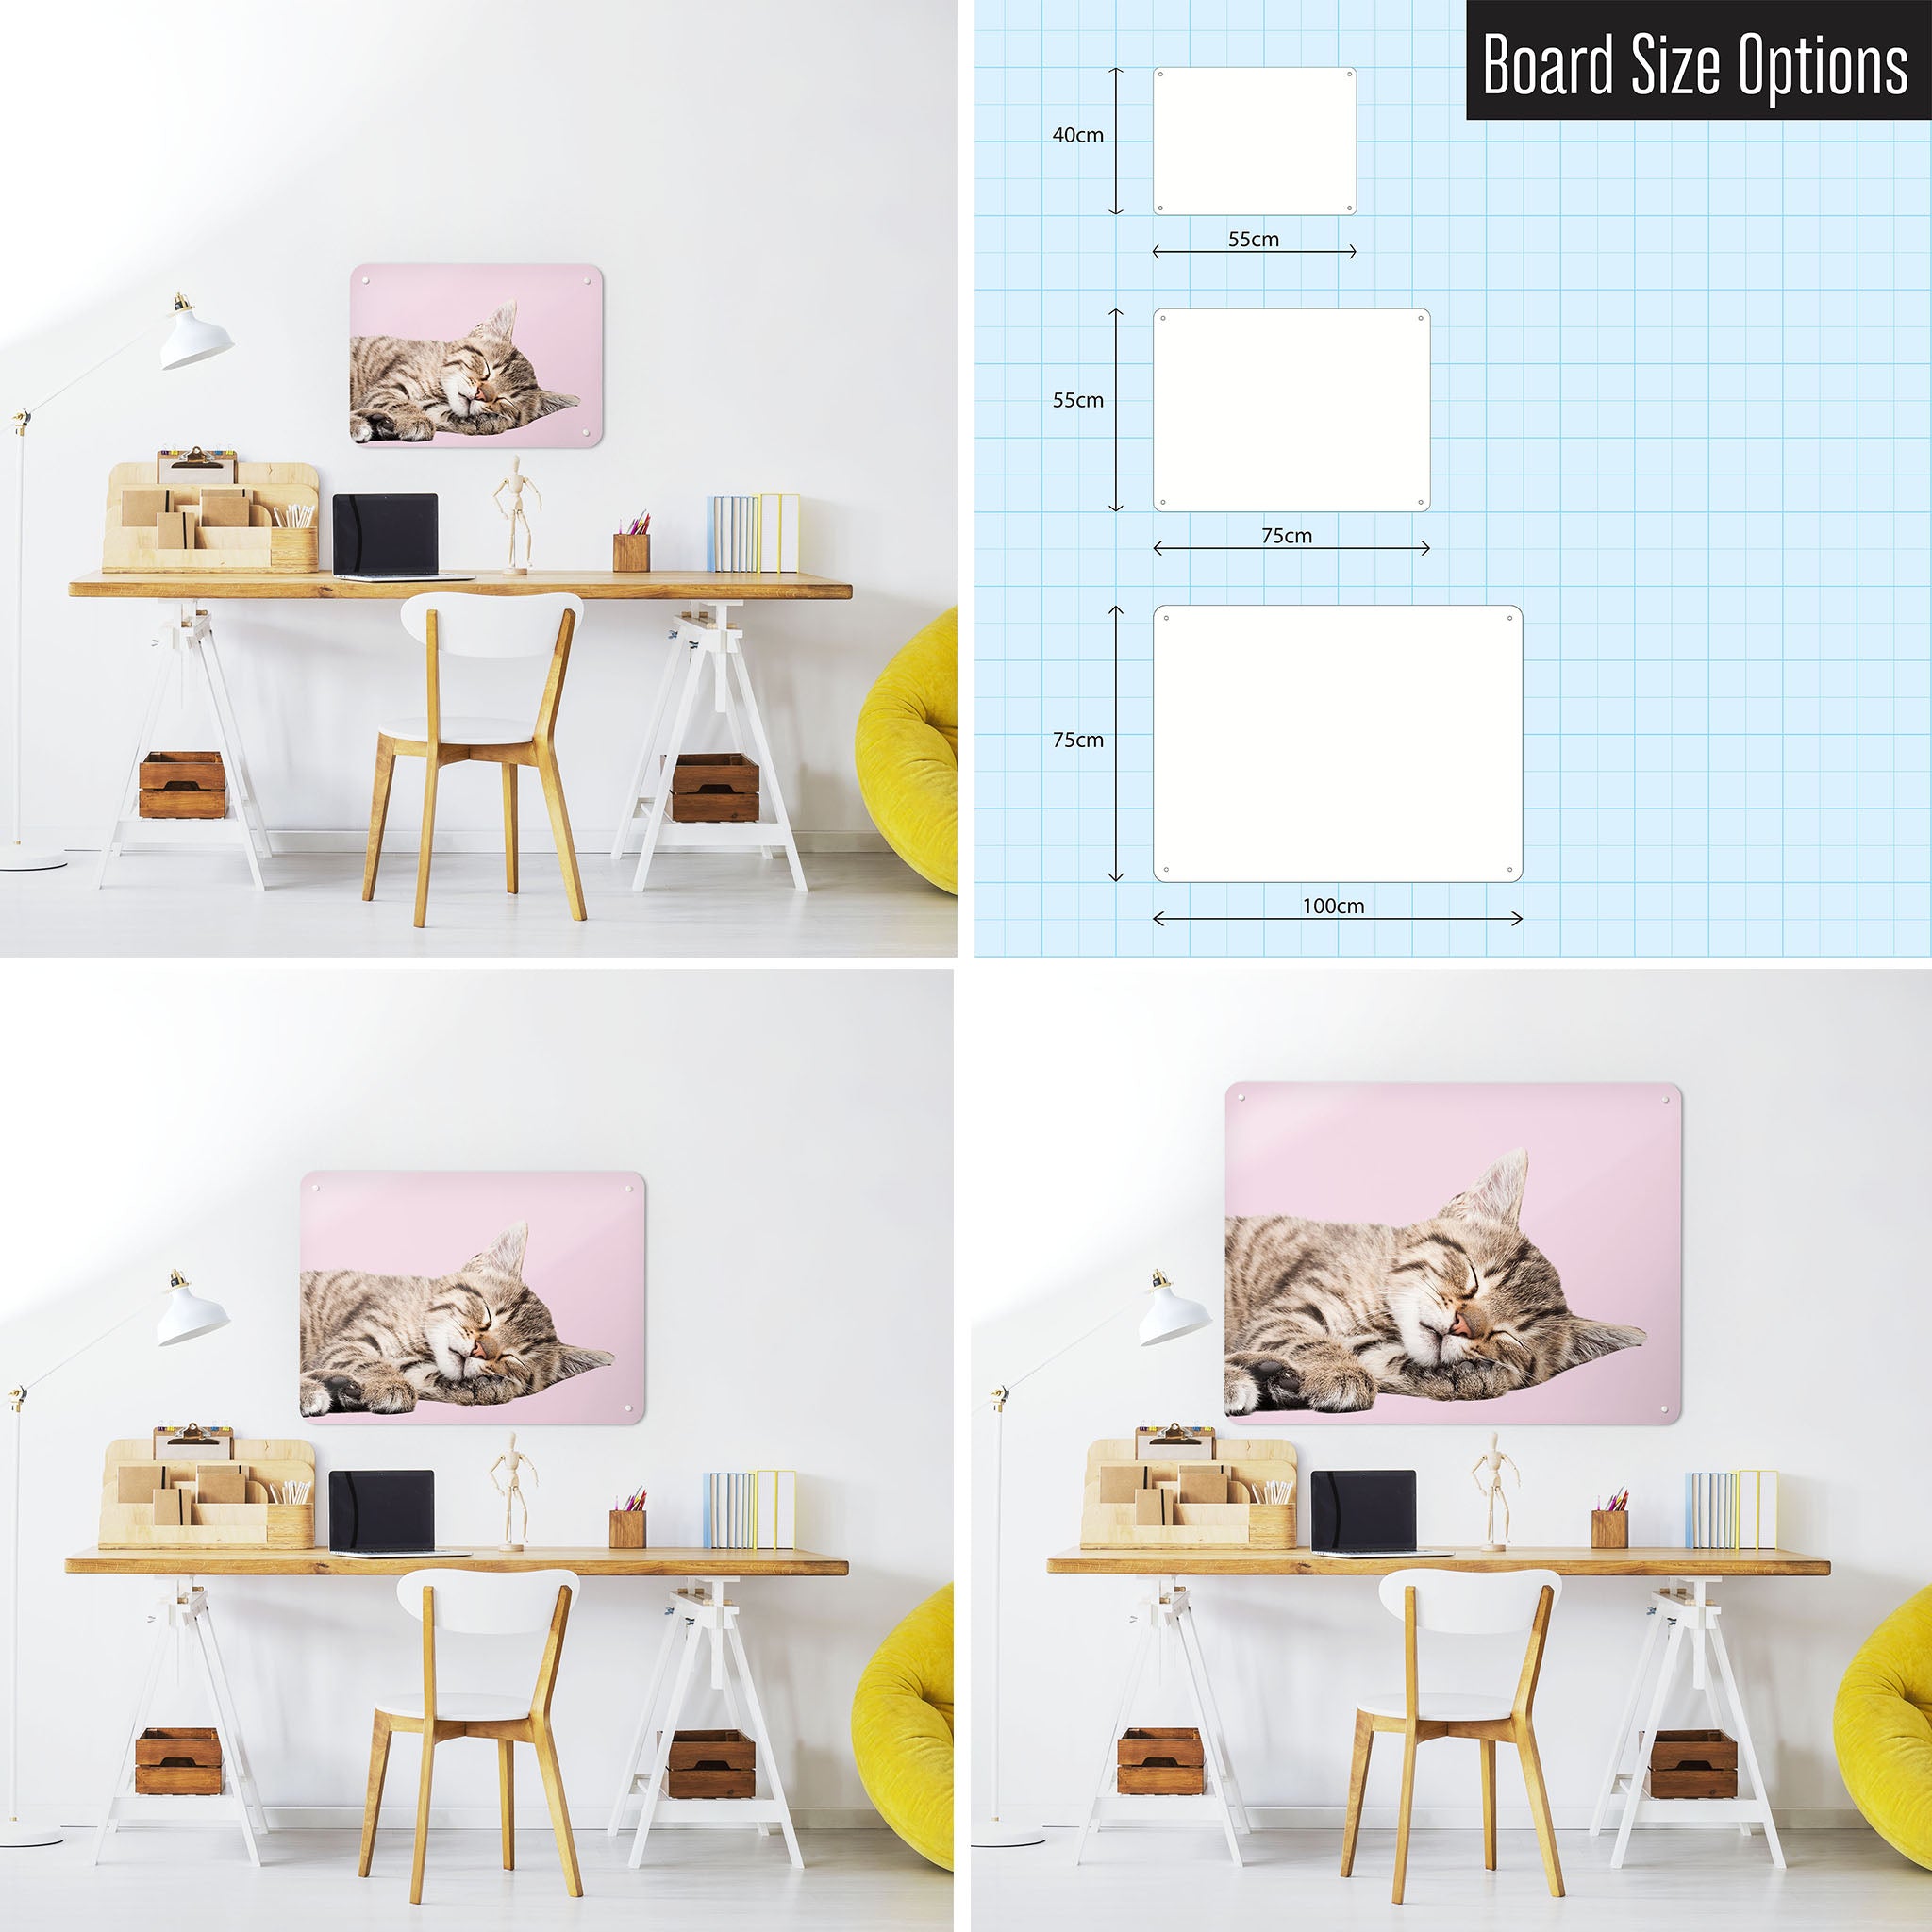 Three photographs of a workspace interior and a diagram to show size comparisons of a tabby kitten photographic magnetic notice board